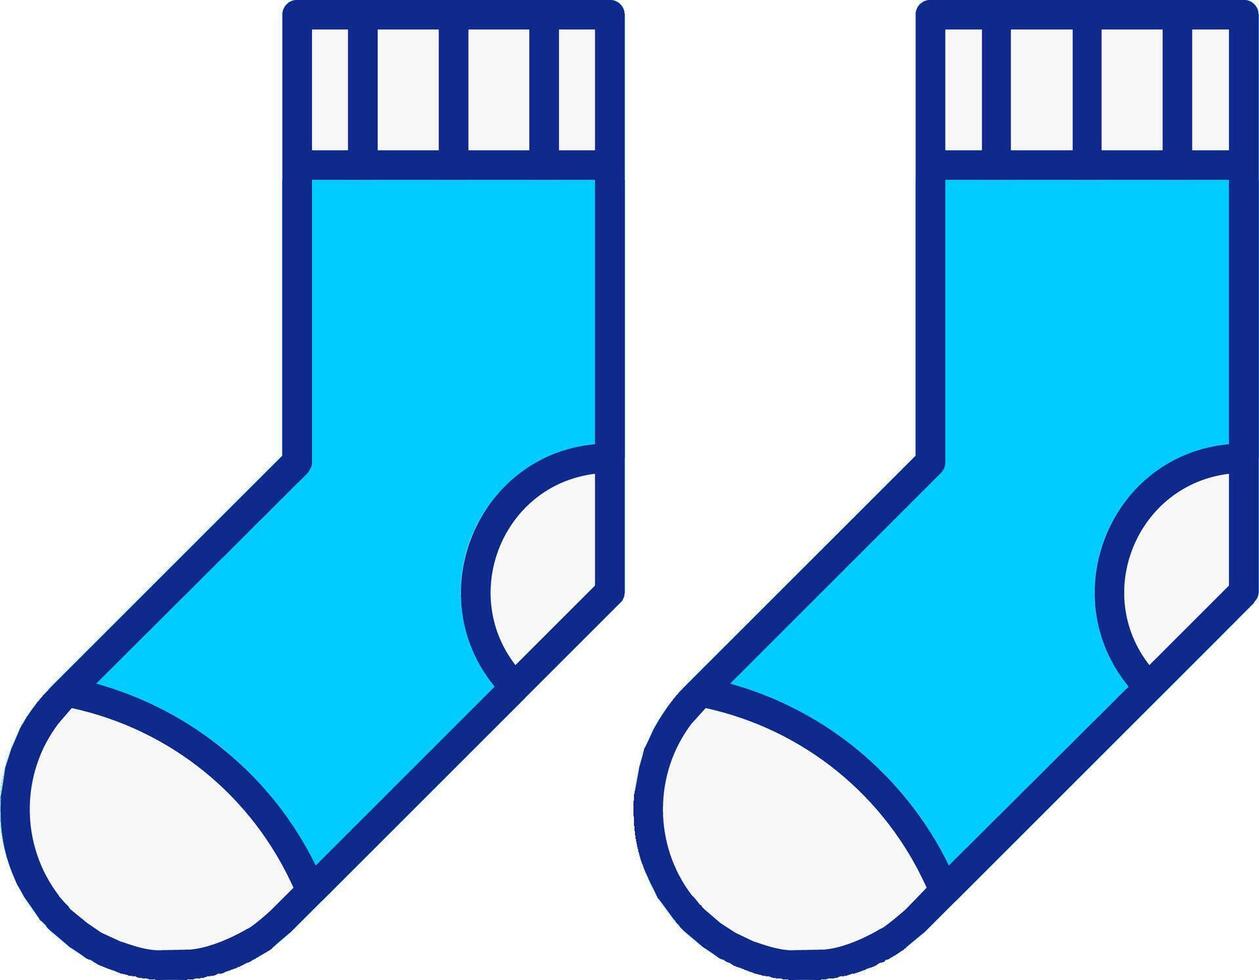 Socks Blue Filled Icon vector